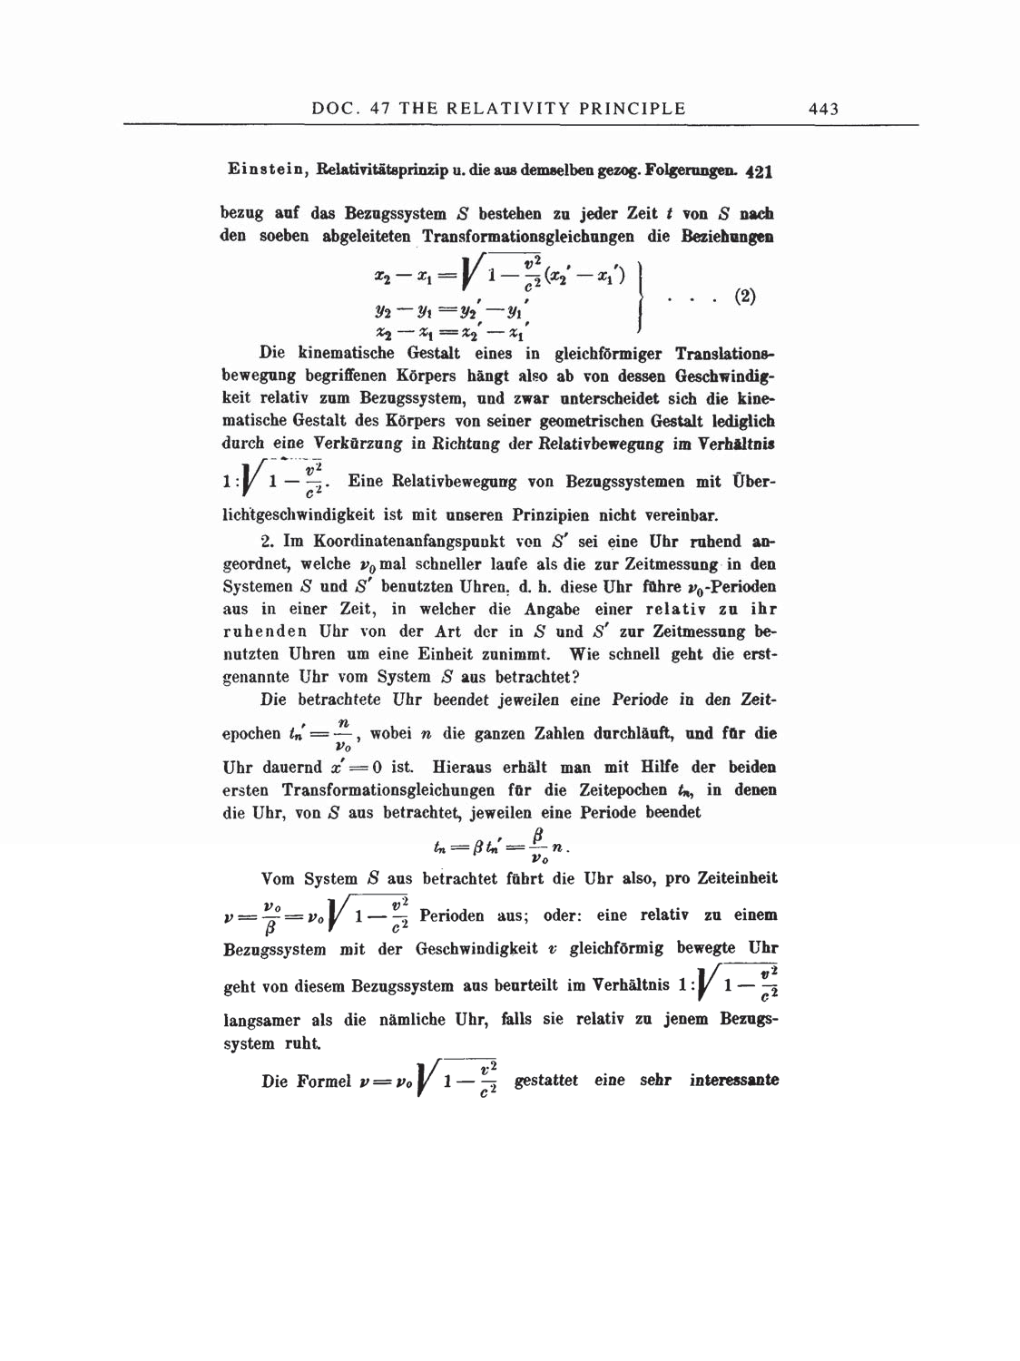 Volume 2: The Swiss Years: Writings, 1900-1909 page 443